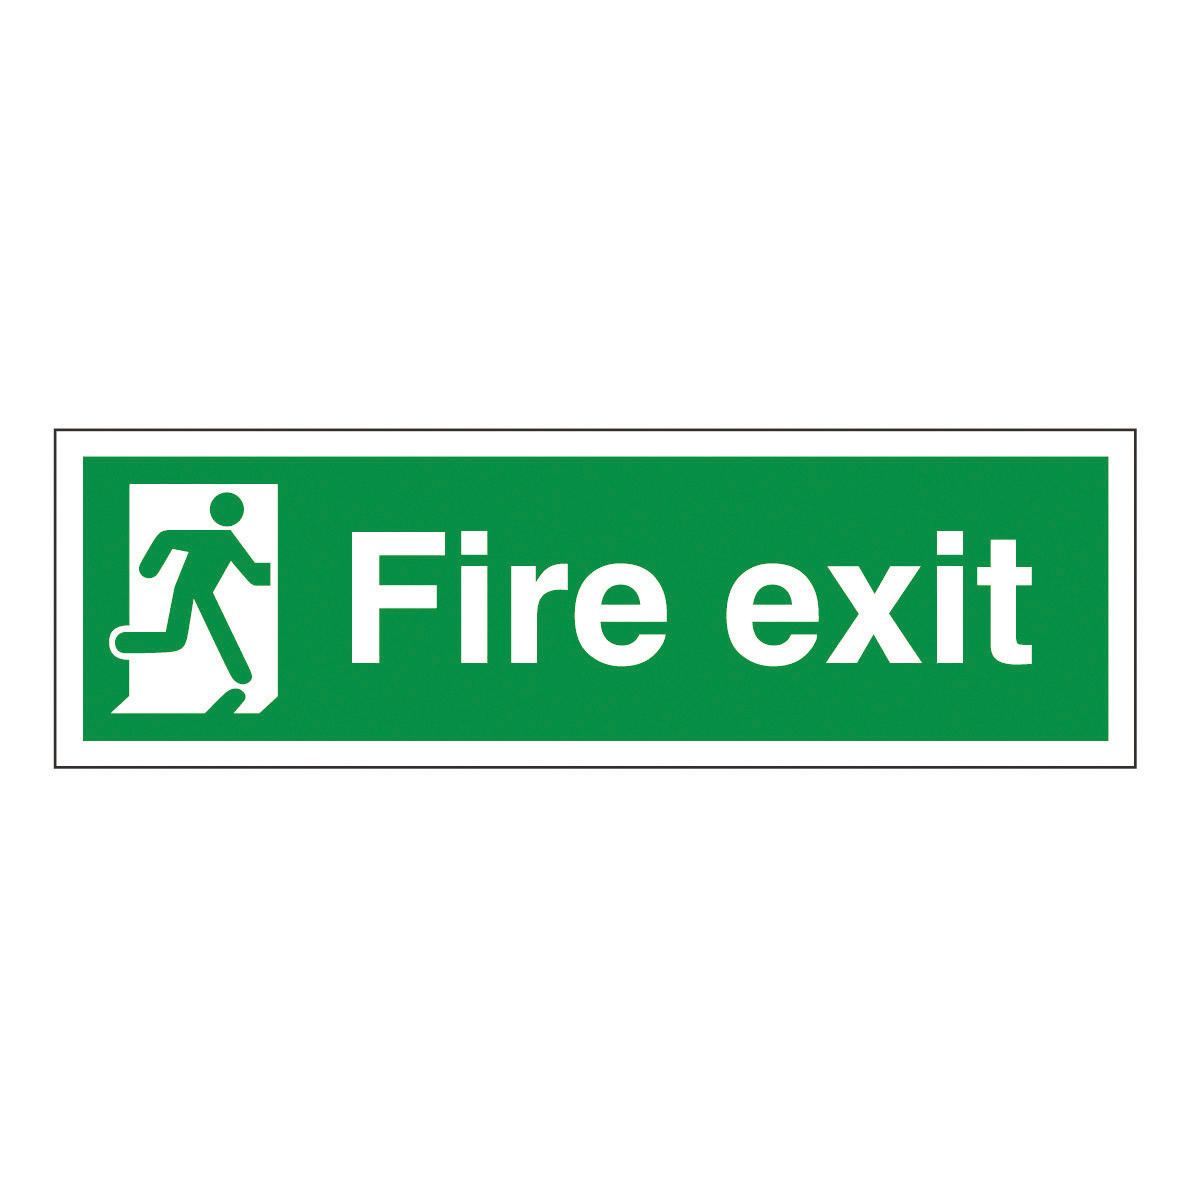 Fire Exit (Man Left) Safety Signs - British Standard Fire Exit ...